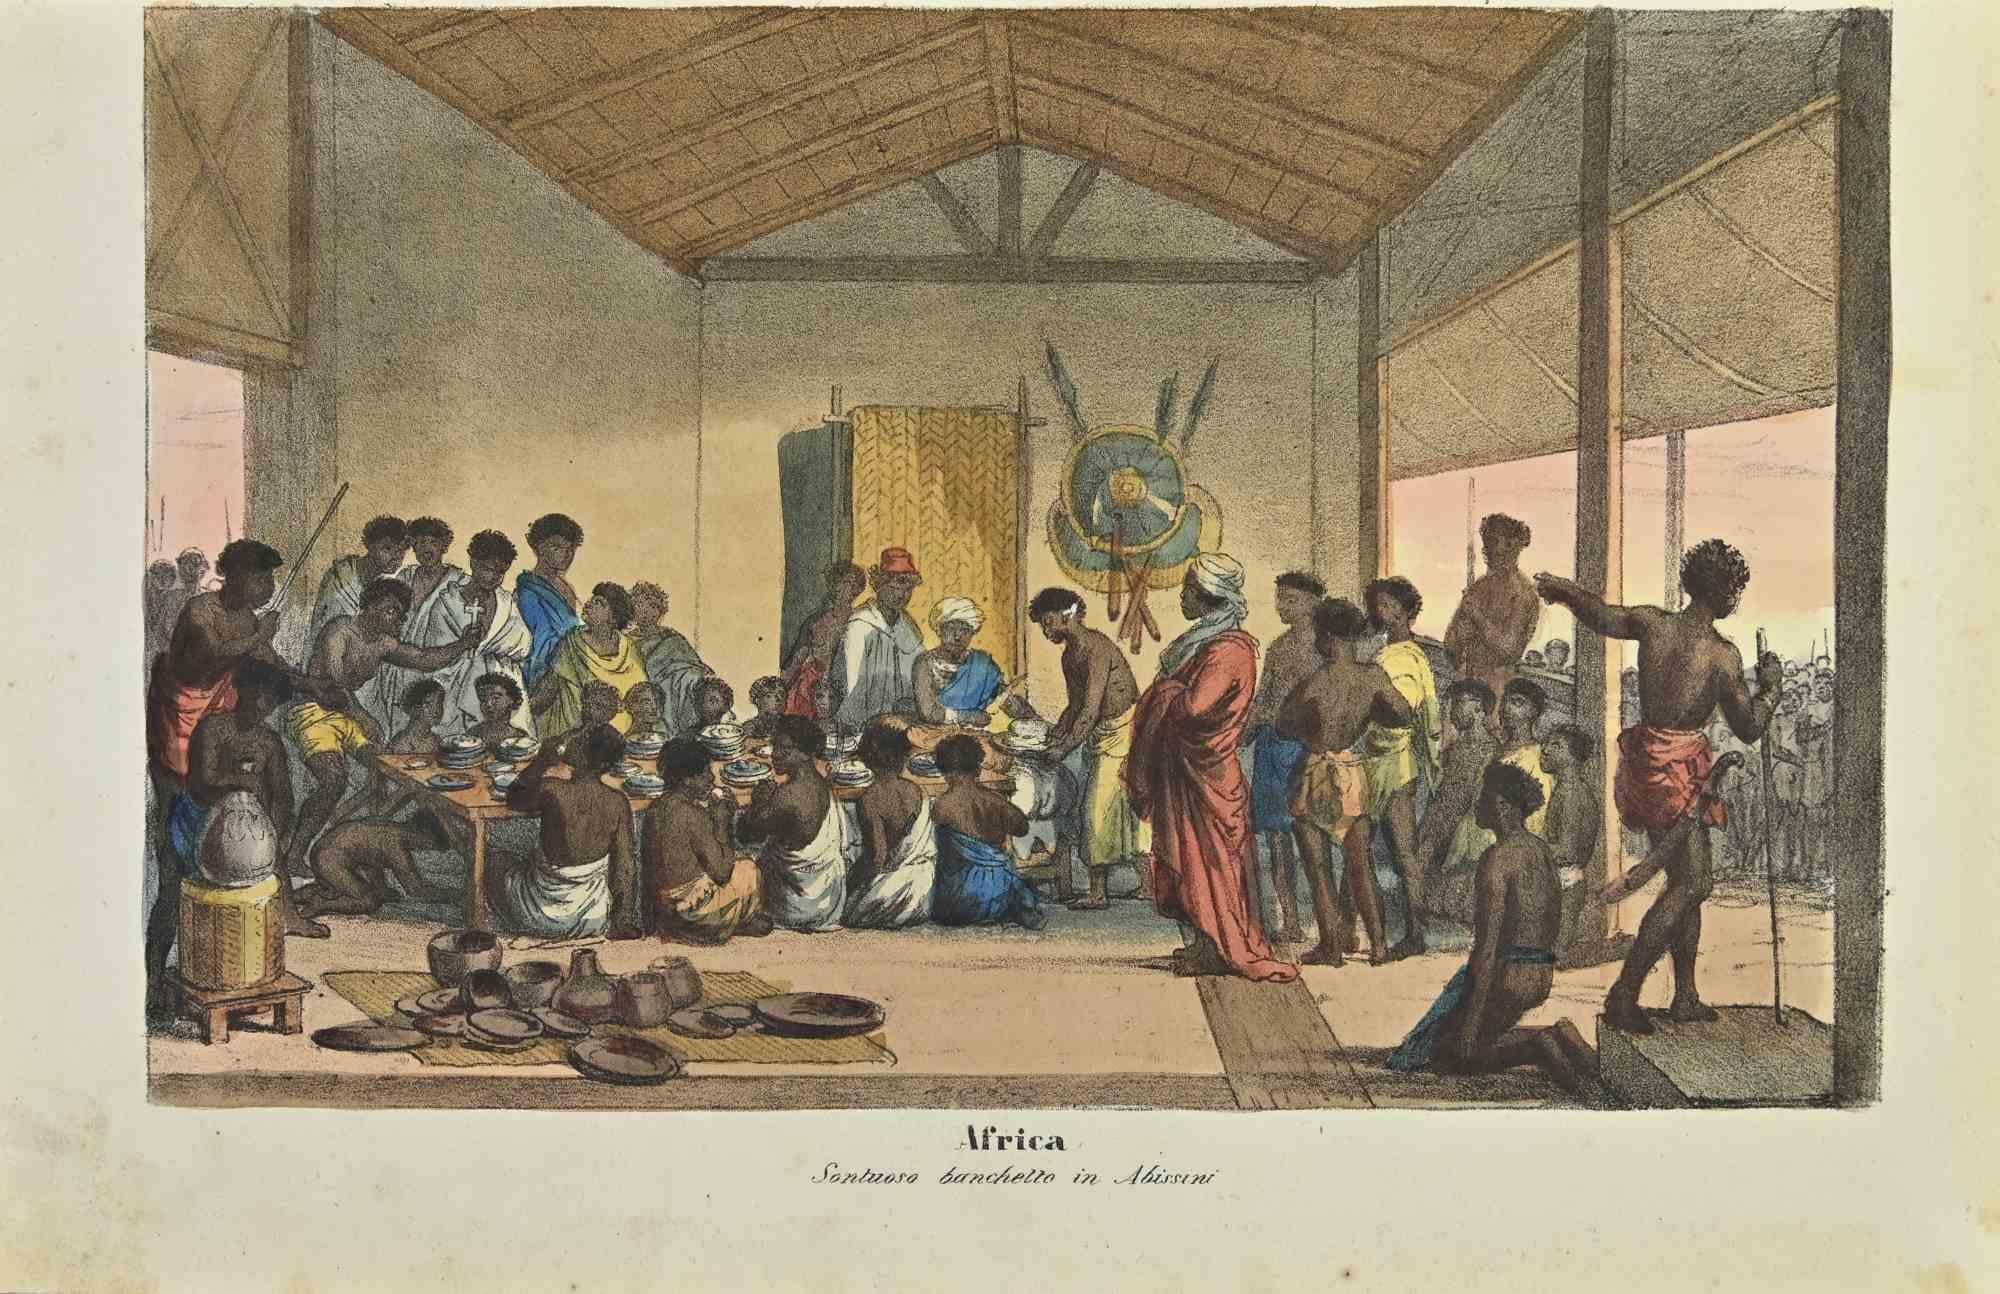 Ancient African Customs is a lithograph made by Auguste Wahlen in 1844.

Hand colored.

Good condition.

At the center of the artwork is the original title "Africa" and subtitle "Sontuoso banchetto in Abissini" (translated, "Sumptuous banquet in